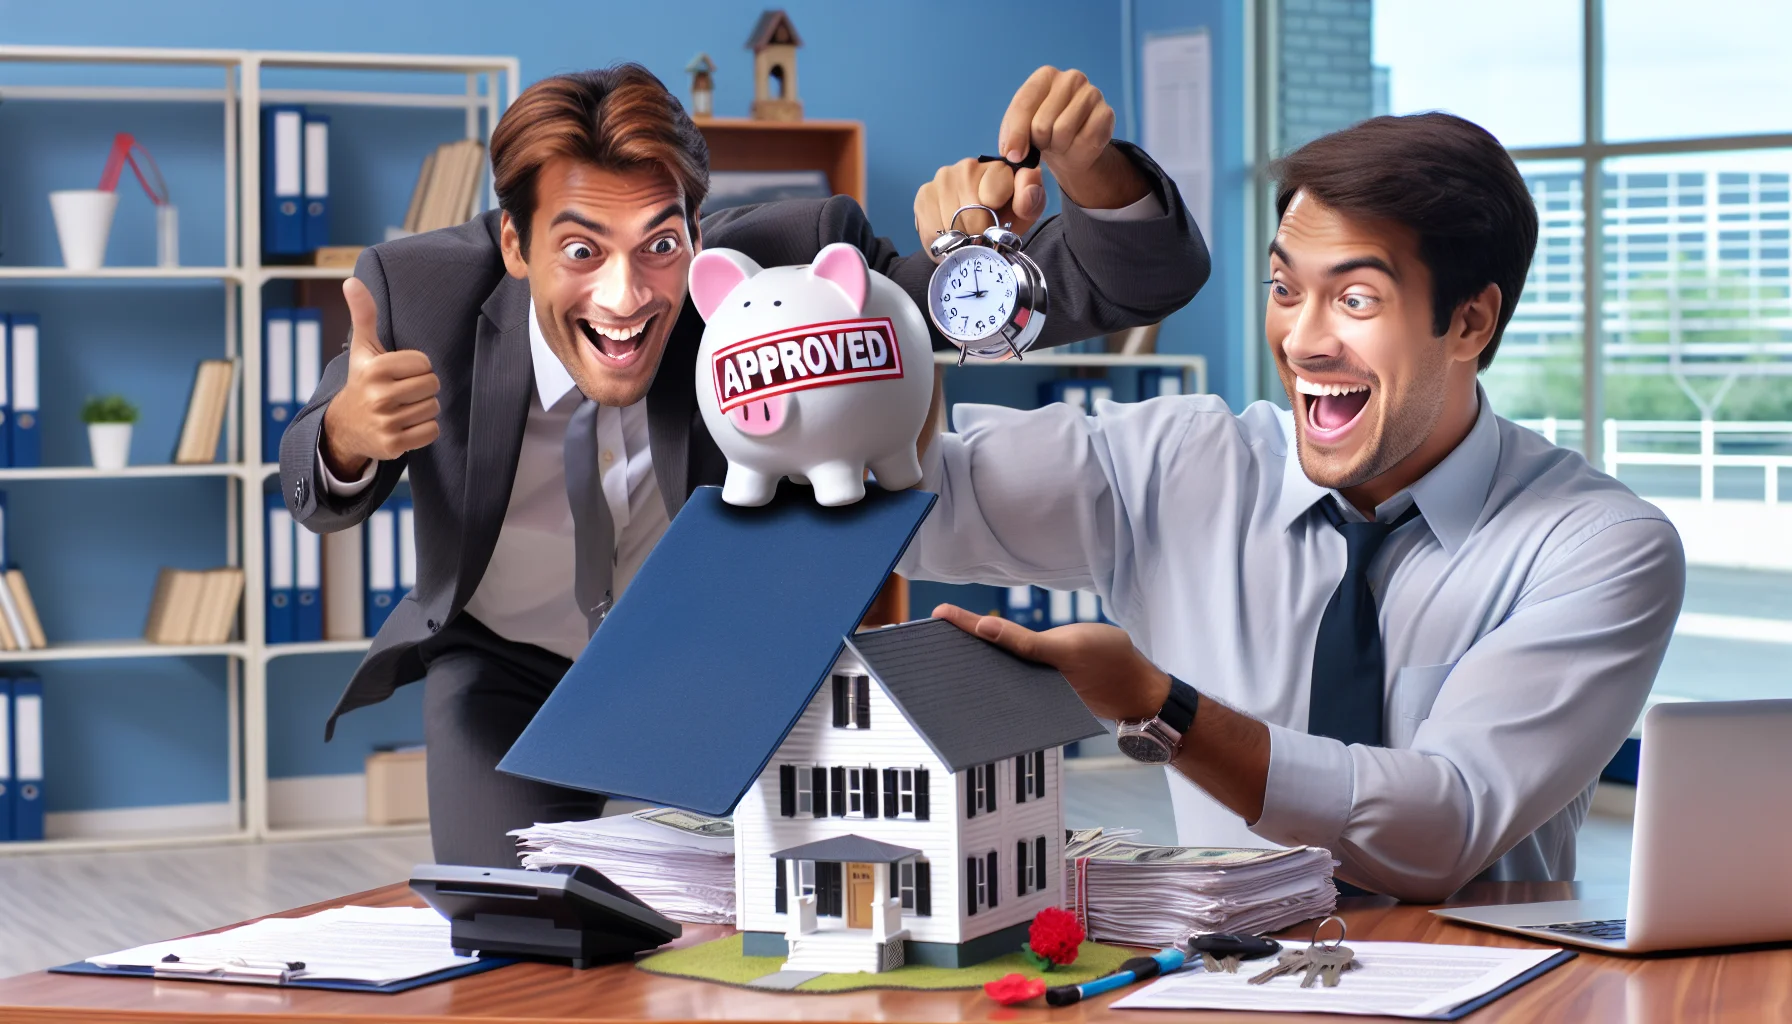 Generate an amusing, reality-inspired image. One half of the picture illustrates a delighted, Caucasian male bank agent, just about to stamp 'Approved' on a huge loan application folder. The other half shows a jubilant Hispanic female homebuyer joyously holding a sizable house-shaped piggy bank with the words 'Down Payment' written on it. They are in a well lit, carefully arranged office with real estate documents, brand-new home keys, and miniature house models on the desk, displaying a perfect scenario for acquiring a down payment for real estate.